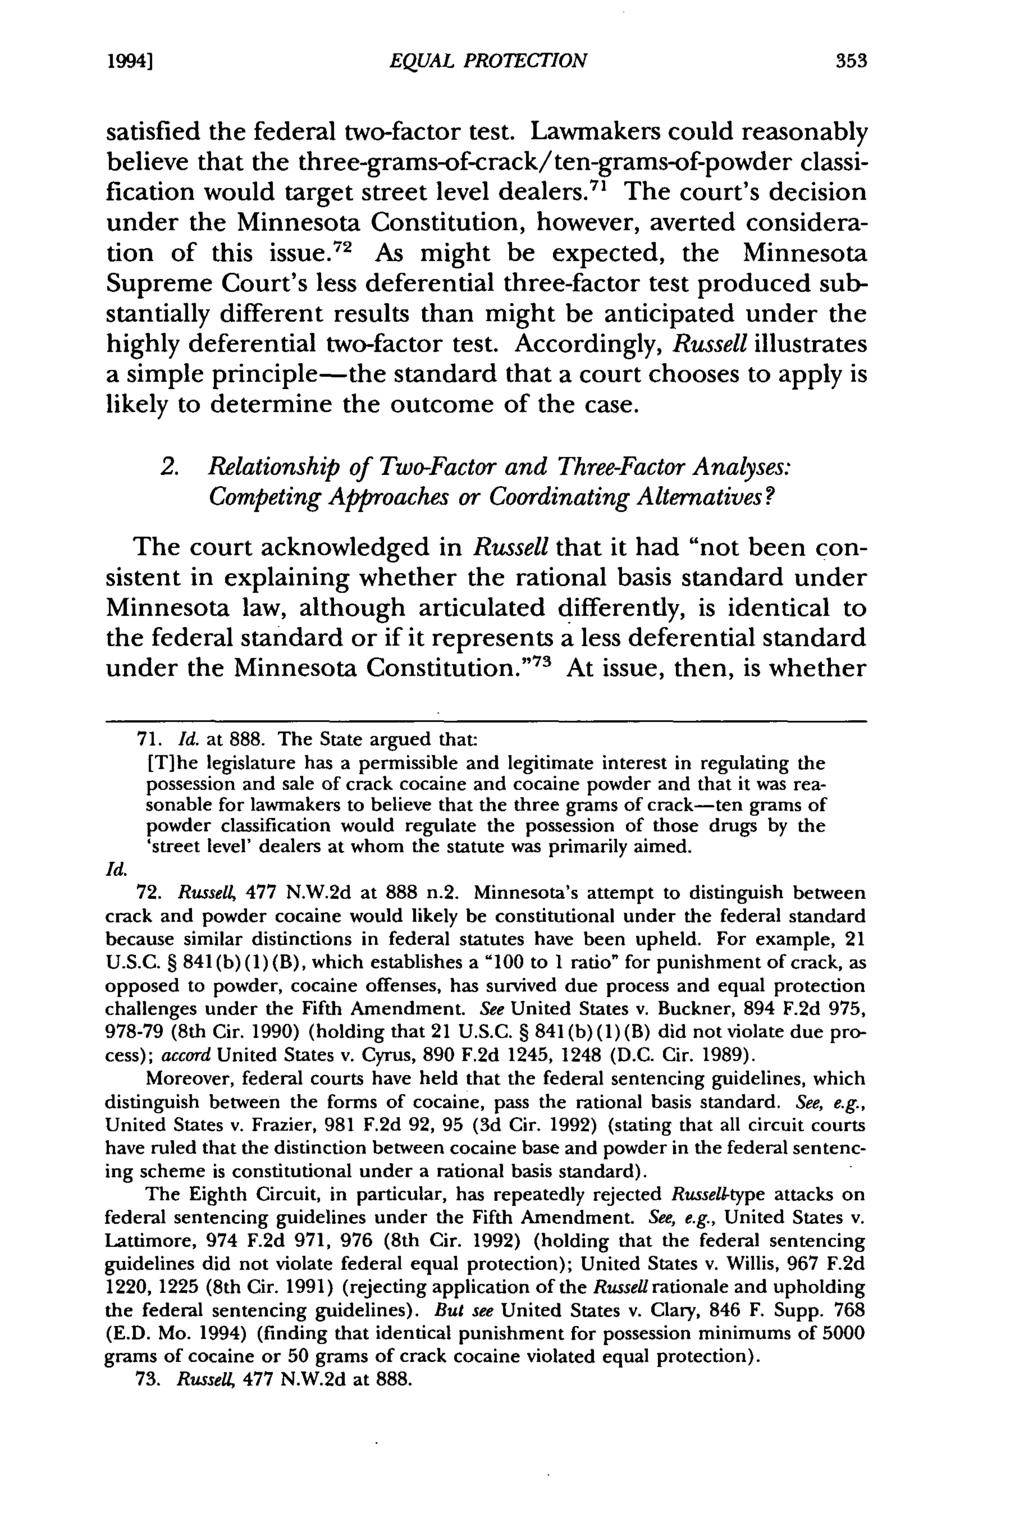 1994] Iijima: Minnesota Equal EQUAL Protection PROTECTION in the Third Millennium: "Old Formulat satisfied the federal two-factor test.